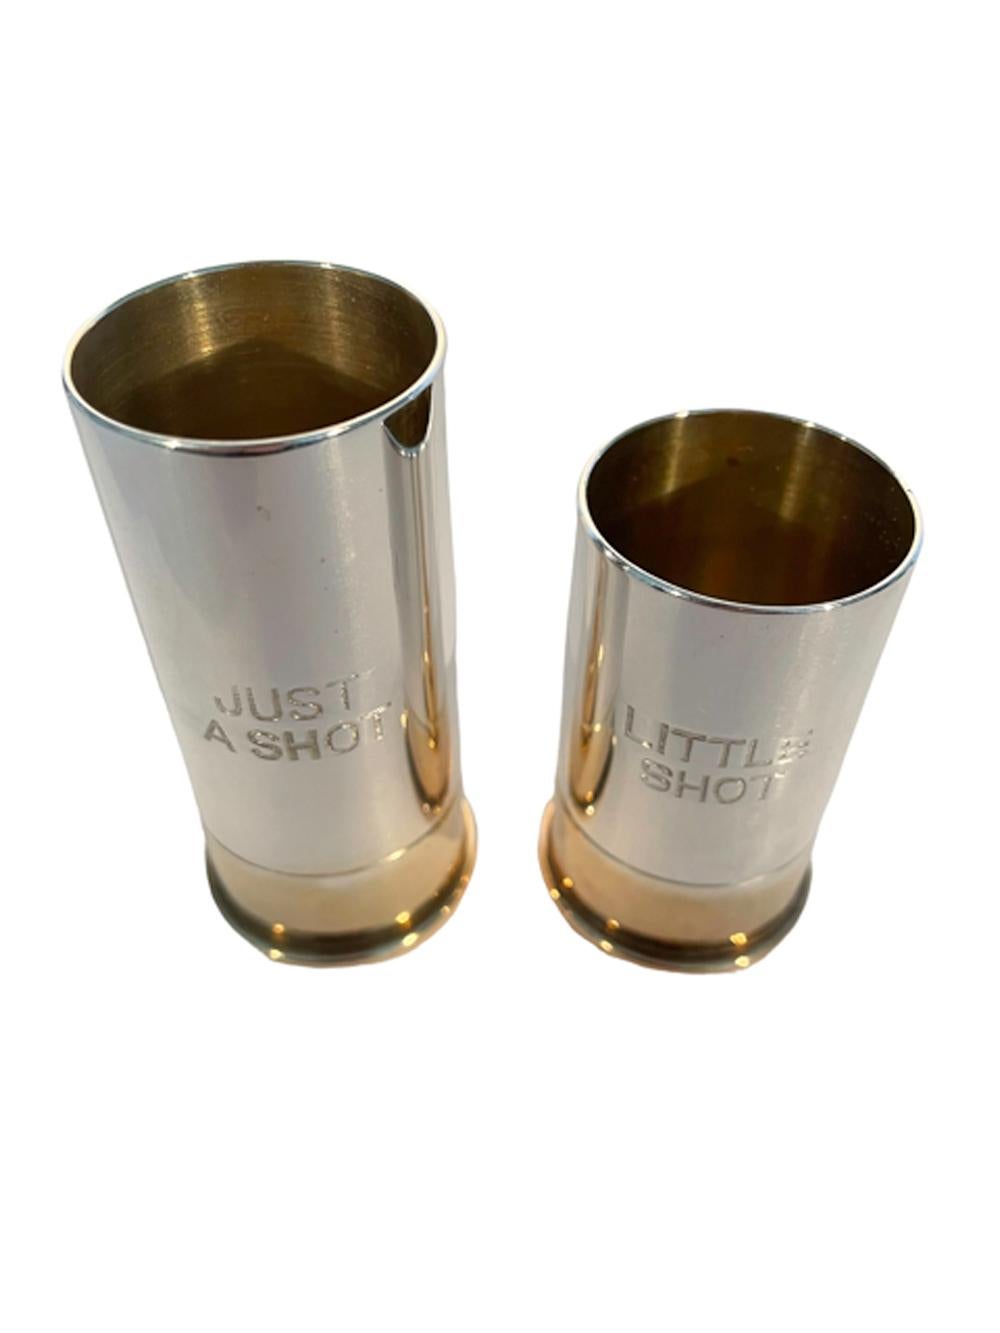 Two Art Deco shotgun shell spirit measures or jiggers in silver plate with gold washed interiors and gold plated bases, engraved 